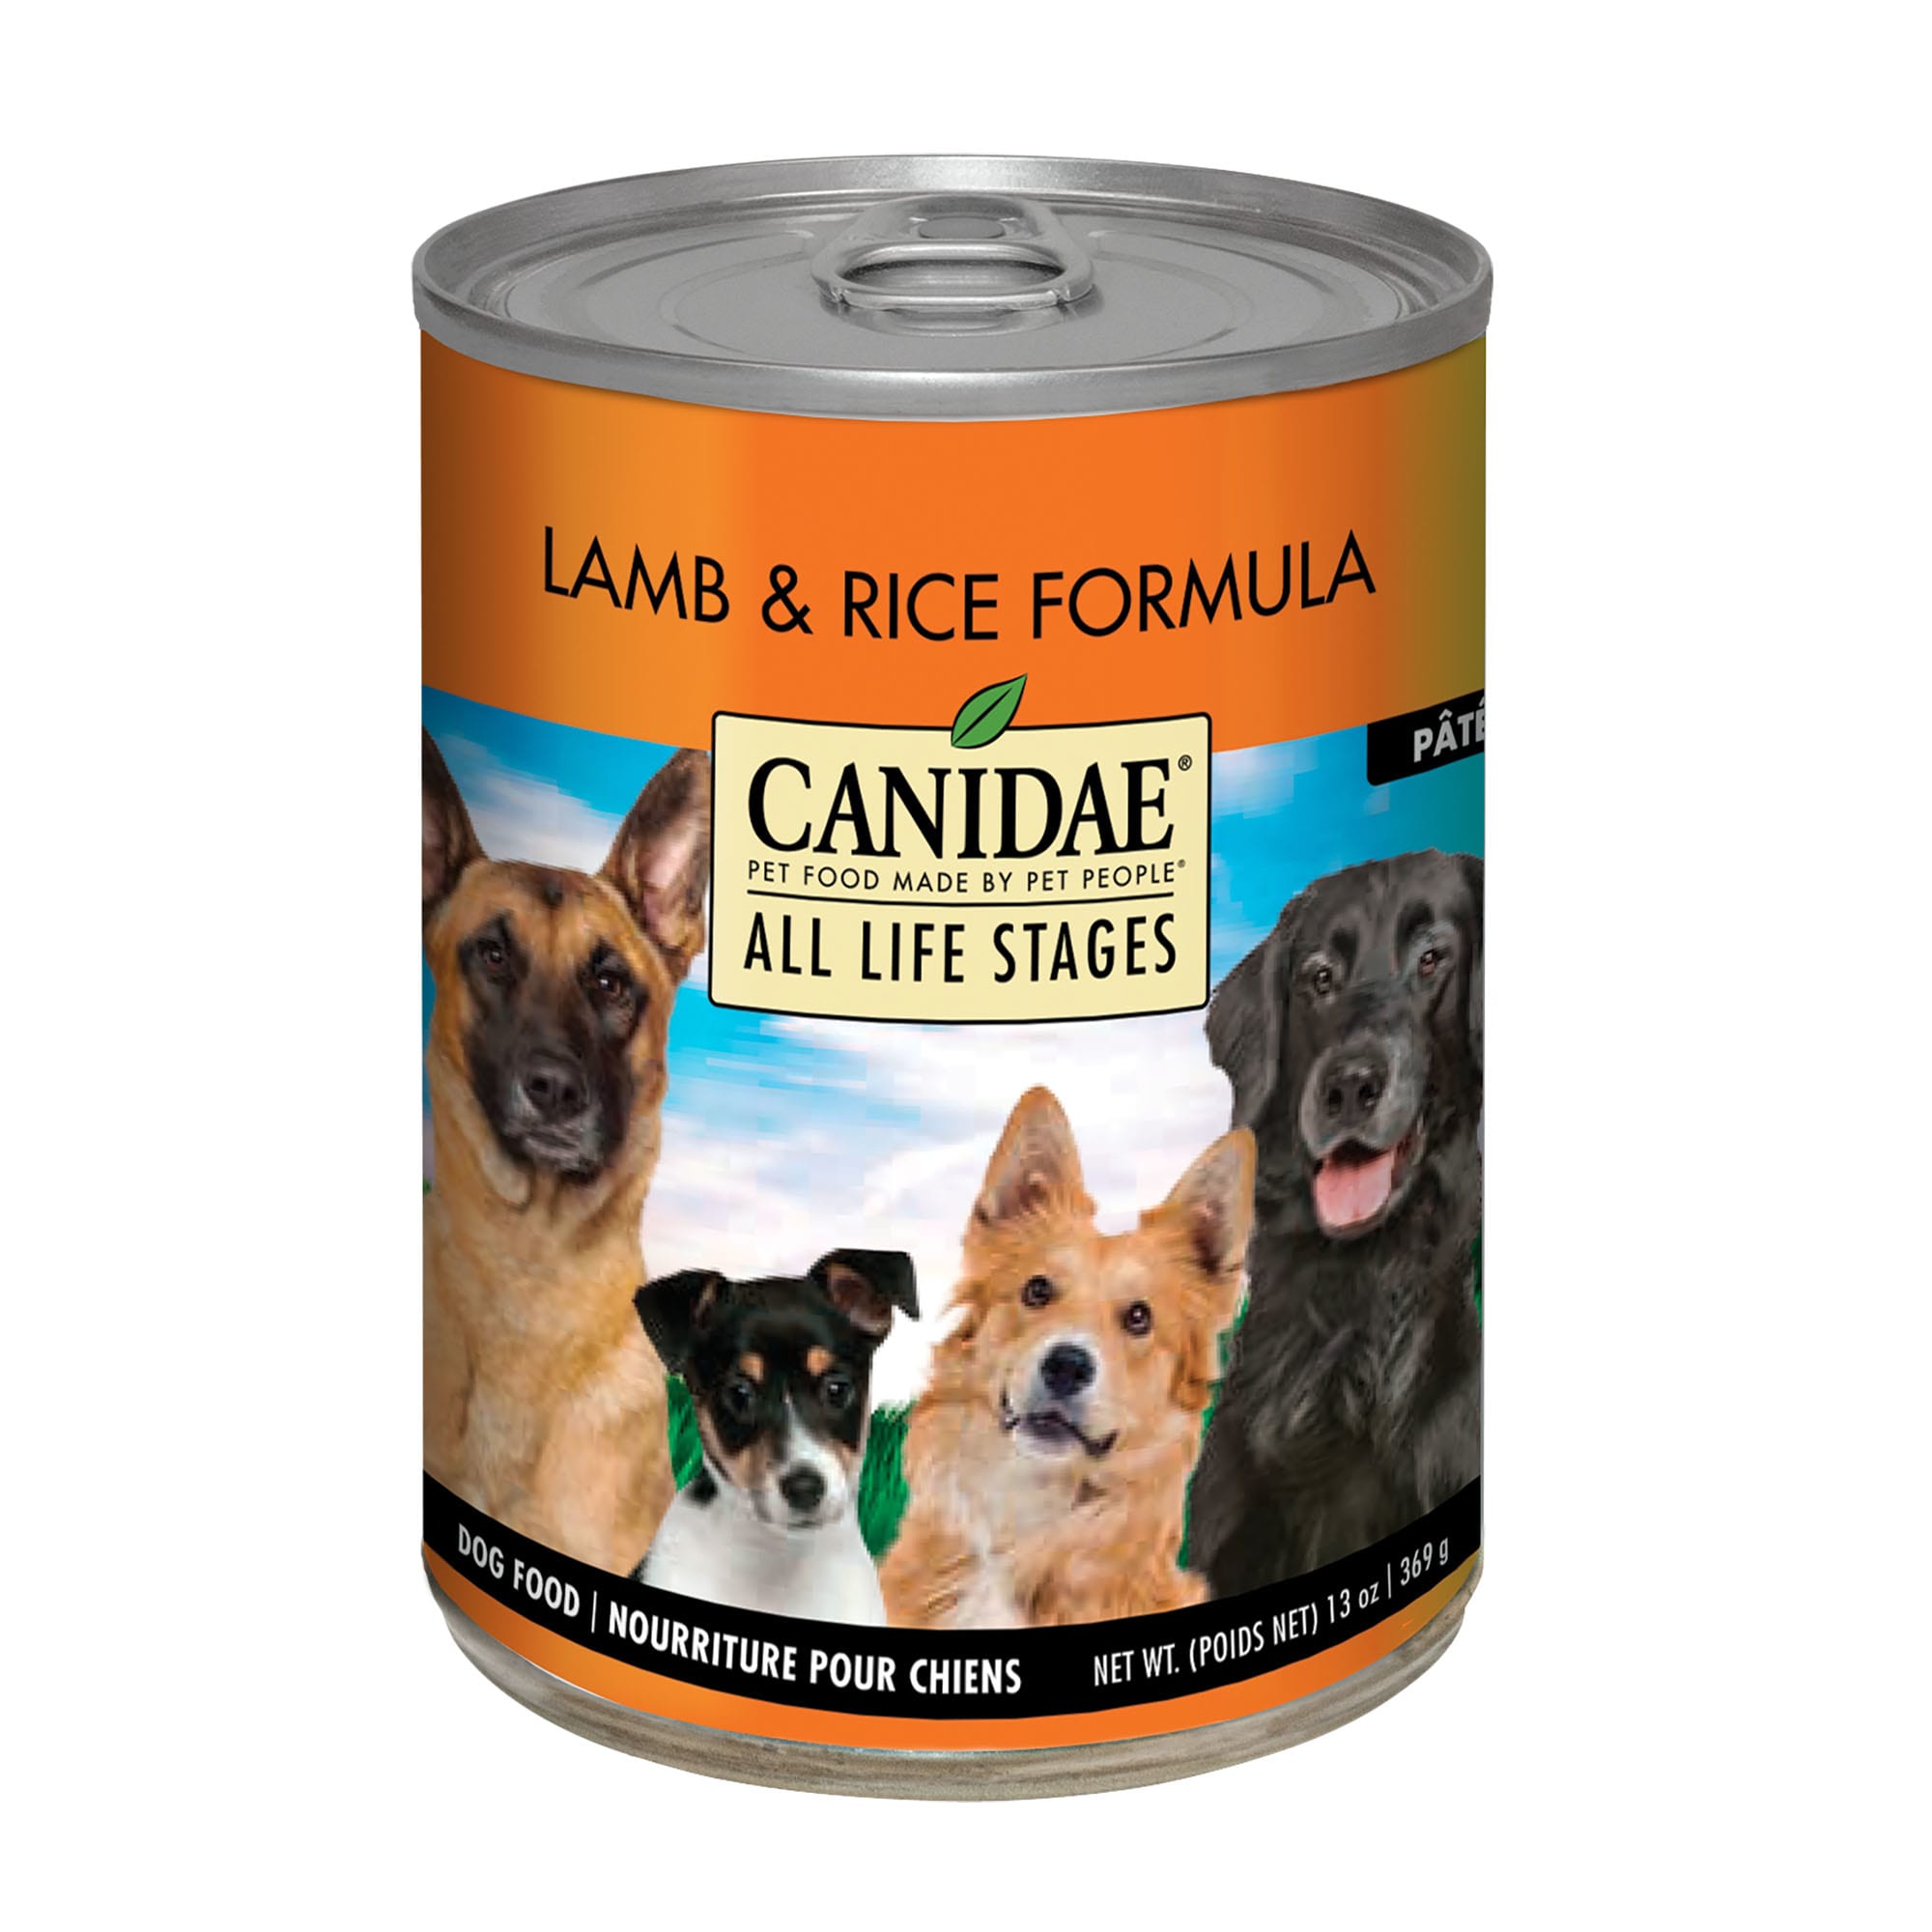 CANIDAE All Life Stages Lamb & Rice Wet Dog Food, 13 oz., Case of 12, 12 X 13 OZ